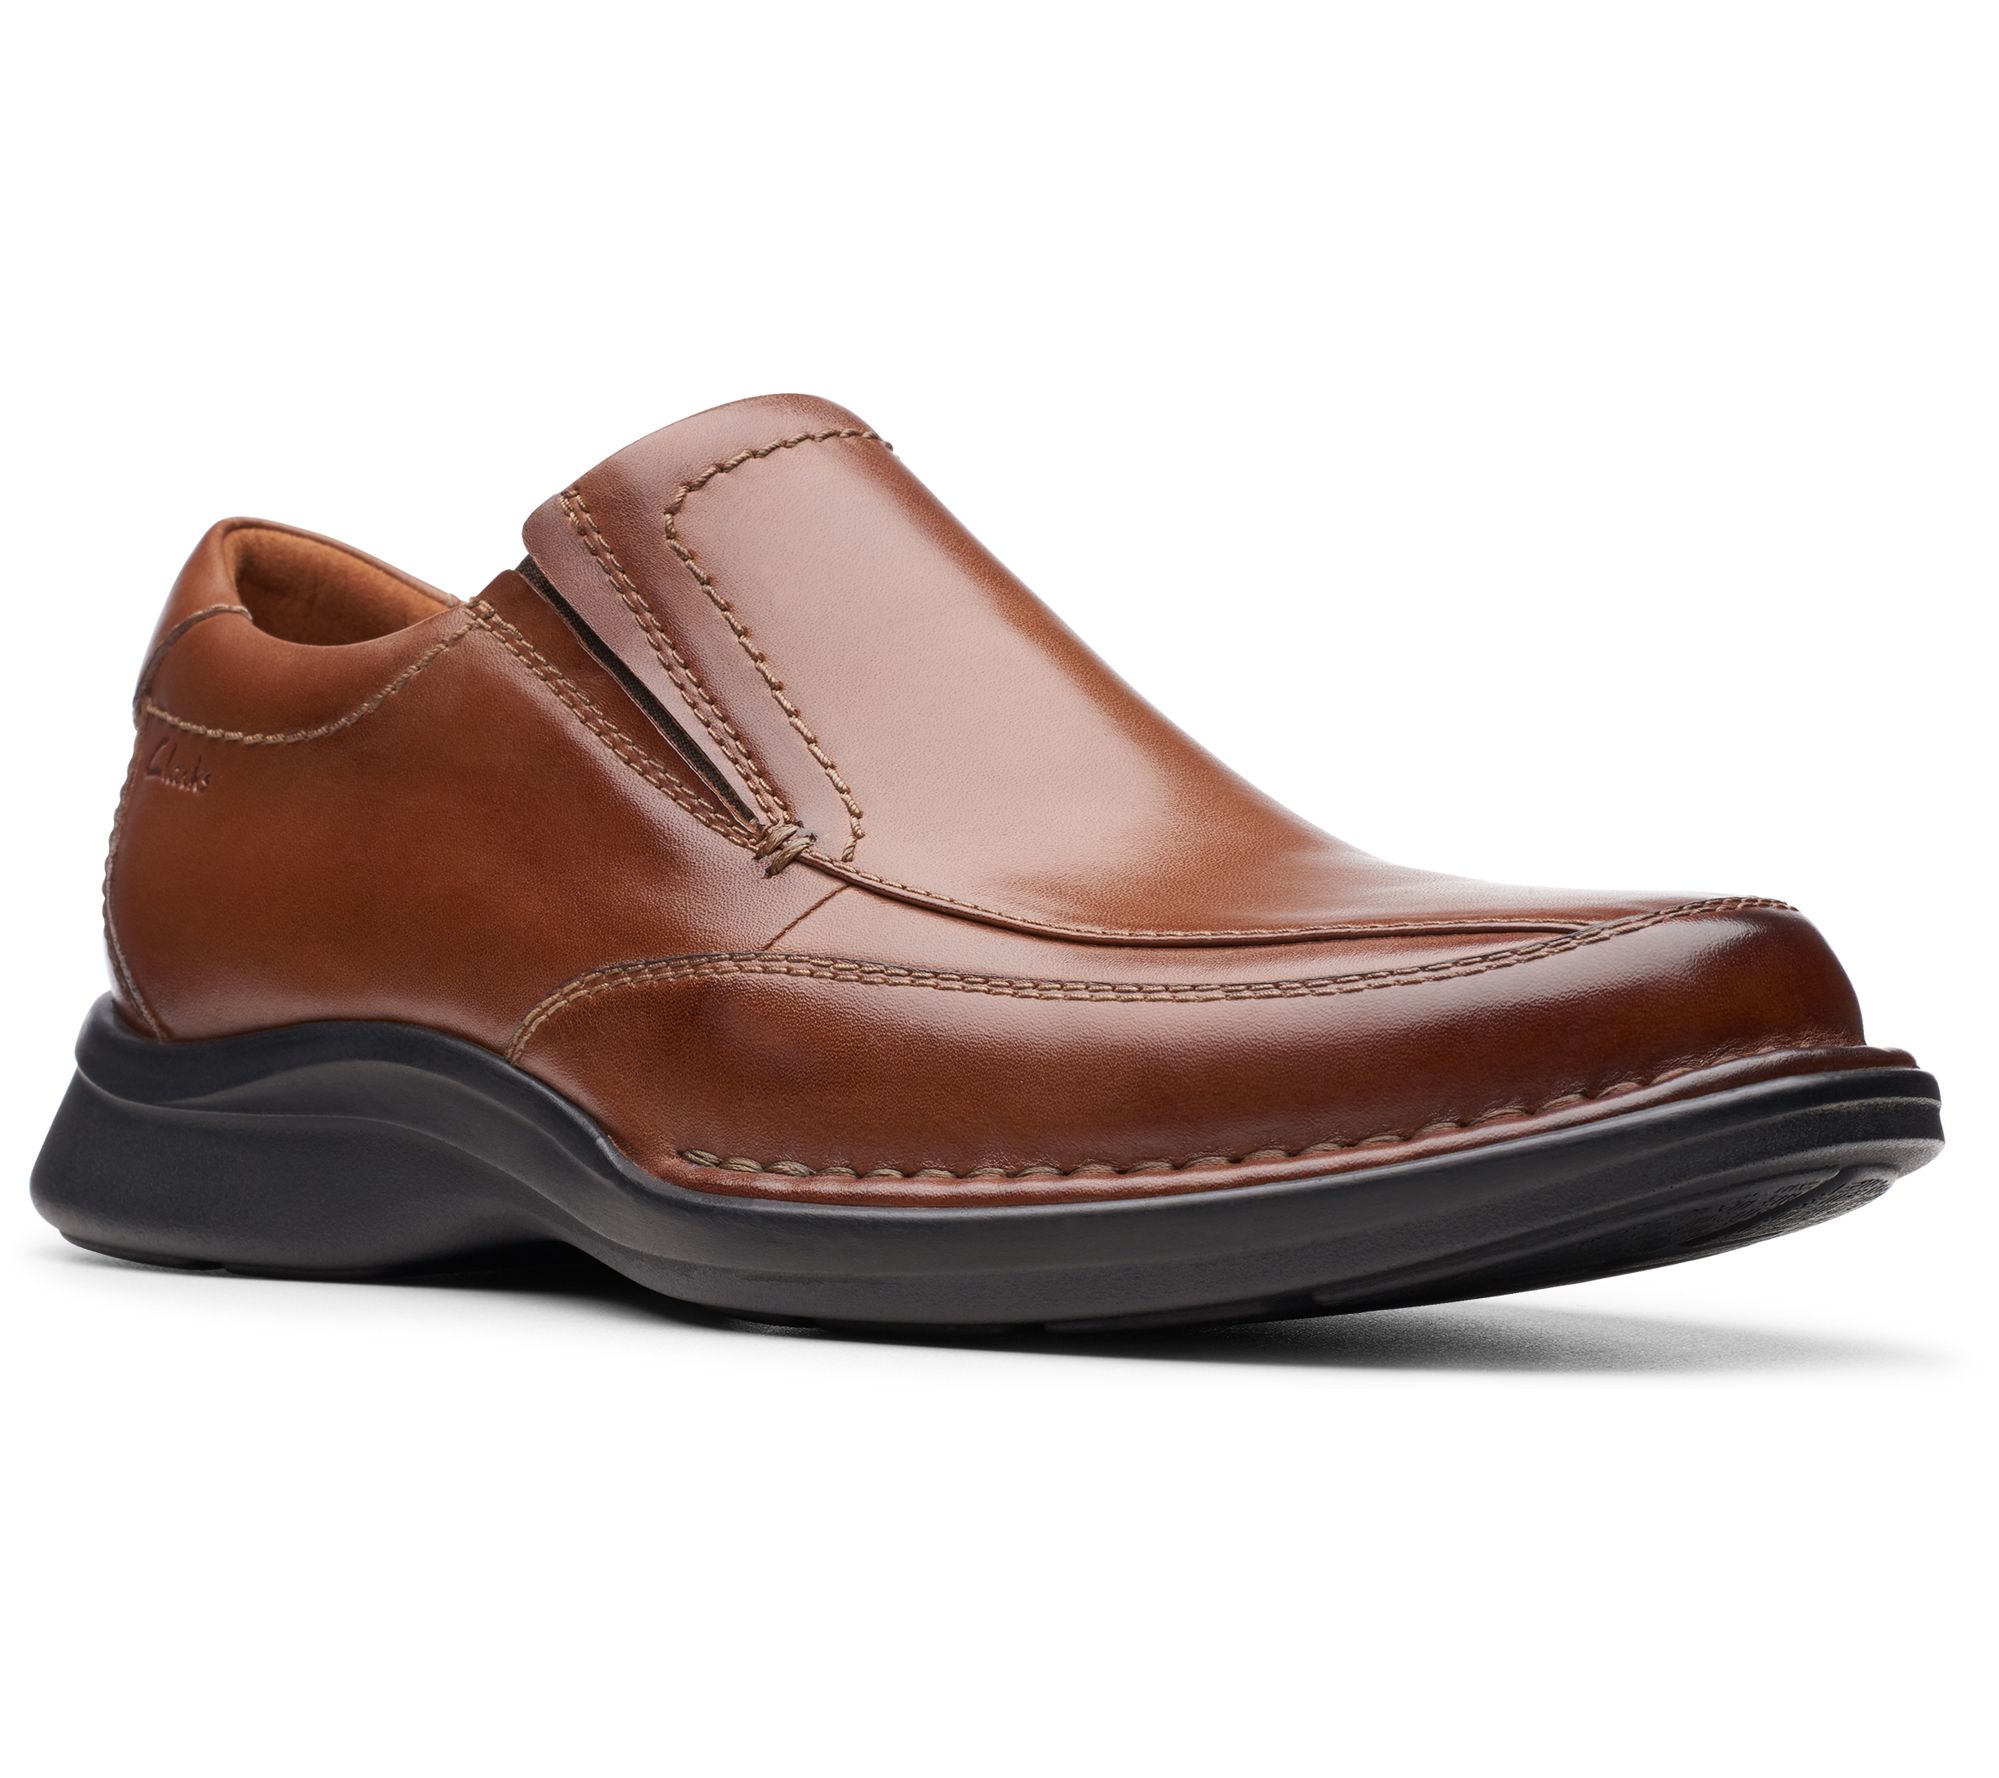 clarks at qvc